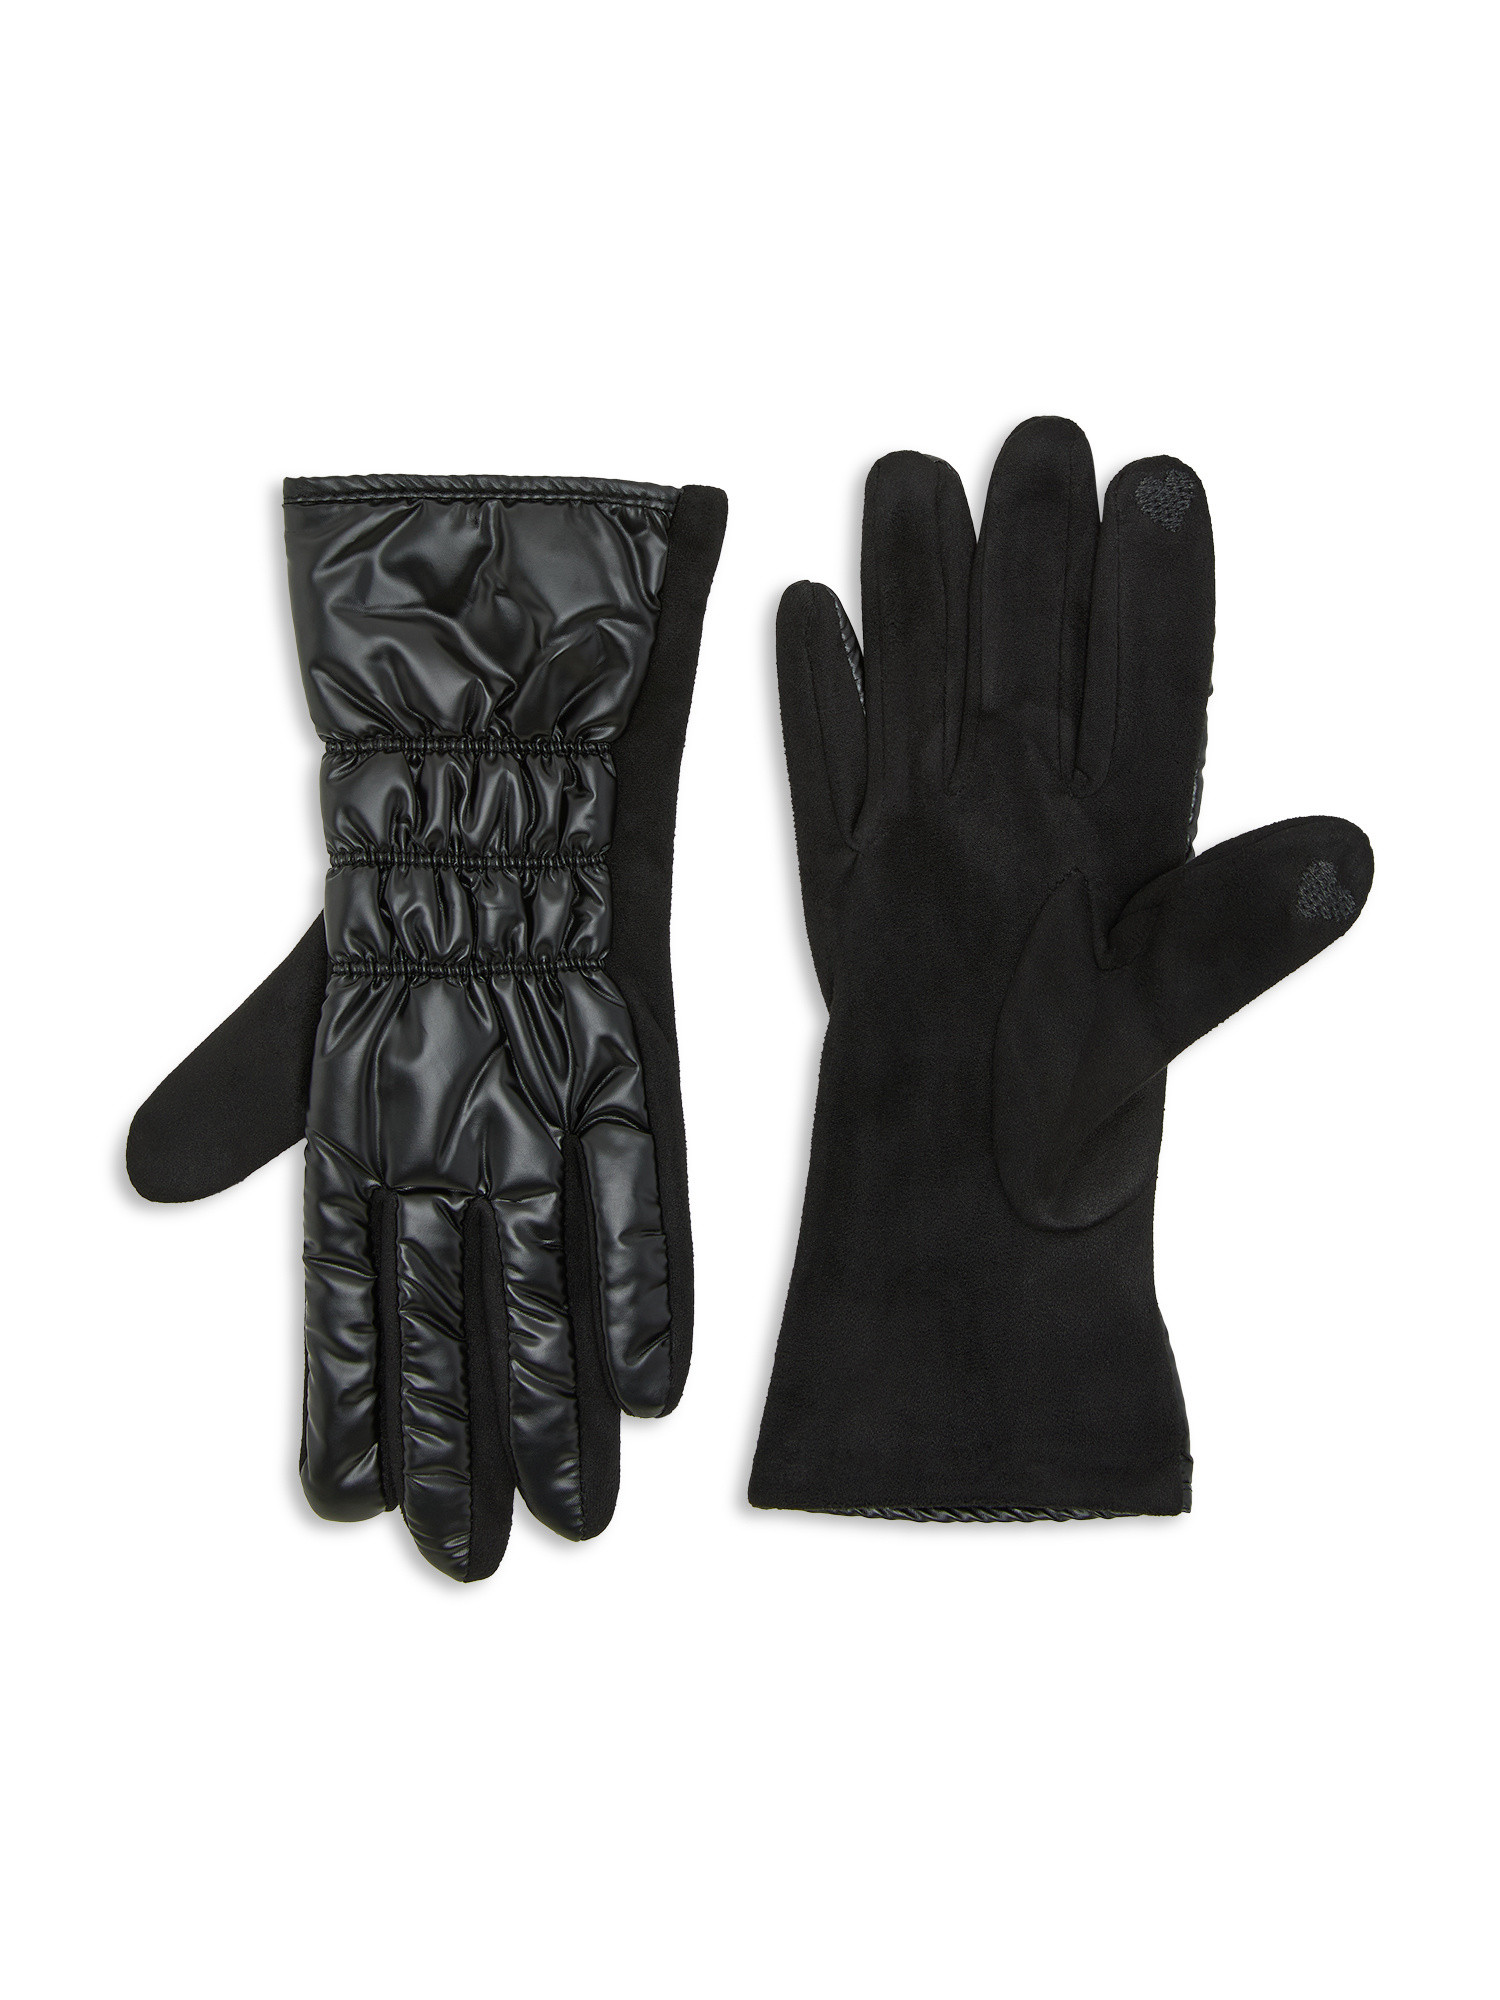 Koan - Two-fabric gloves, Black, large image number 0